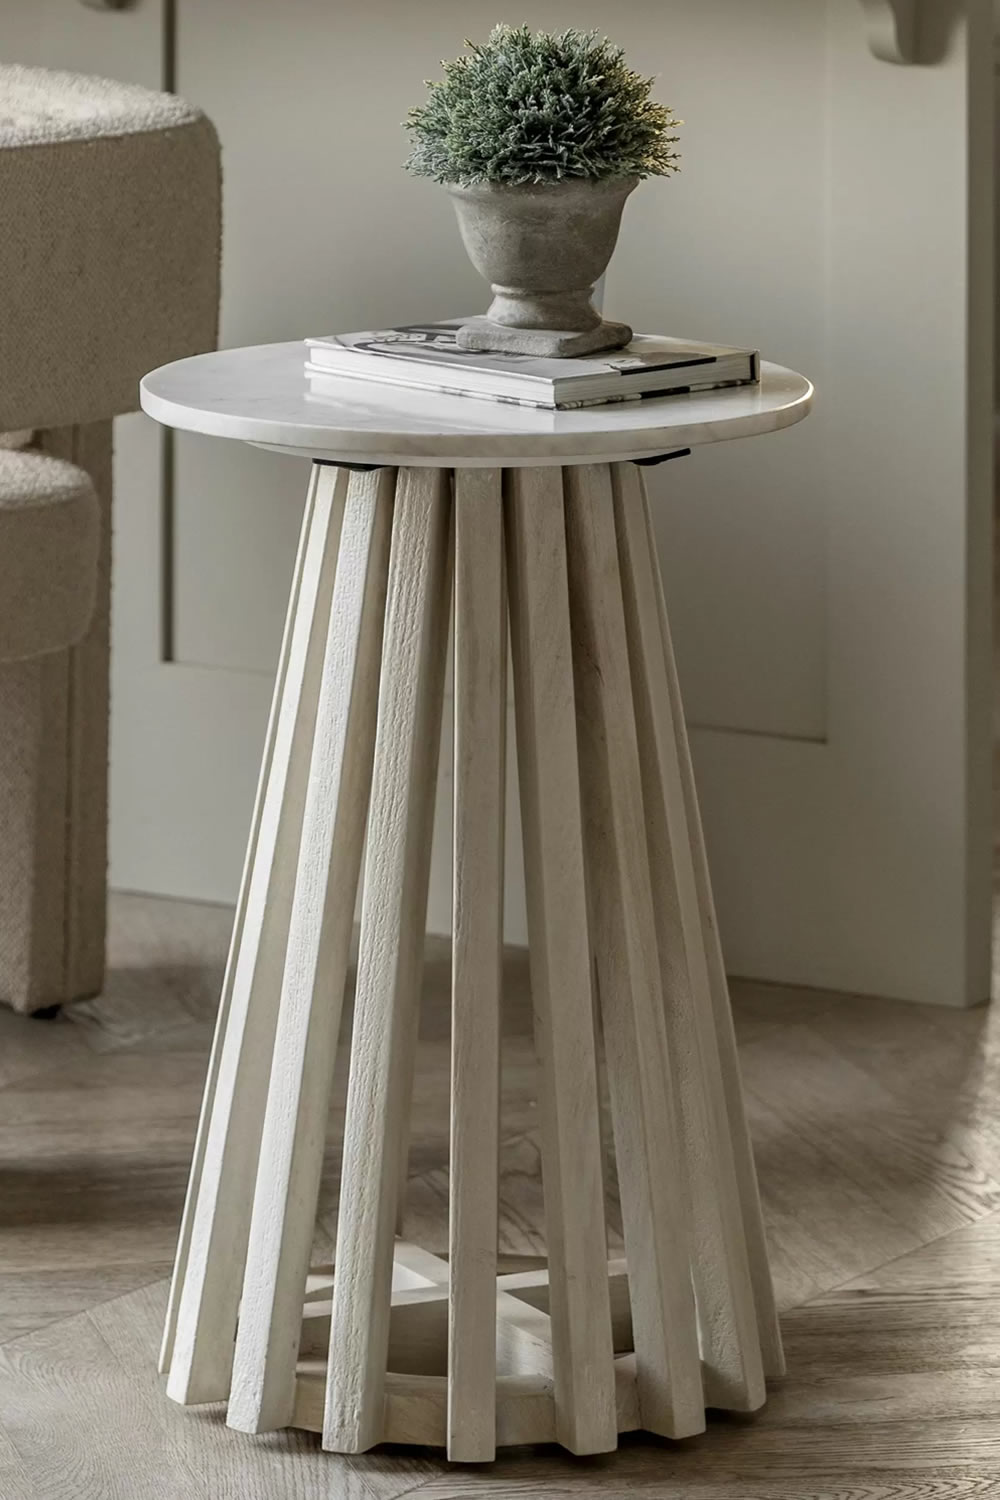 View Soho Round Side Table Slatted Base Made From Natural Mango Wood Chic Design White Indian Marble Top Easy Assembly Matching Pieces Available information